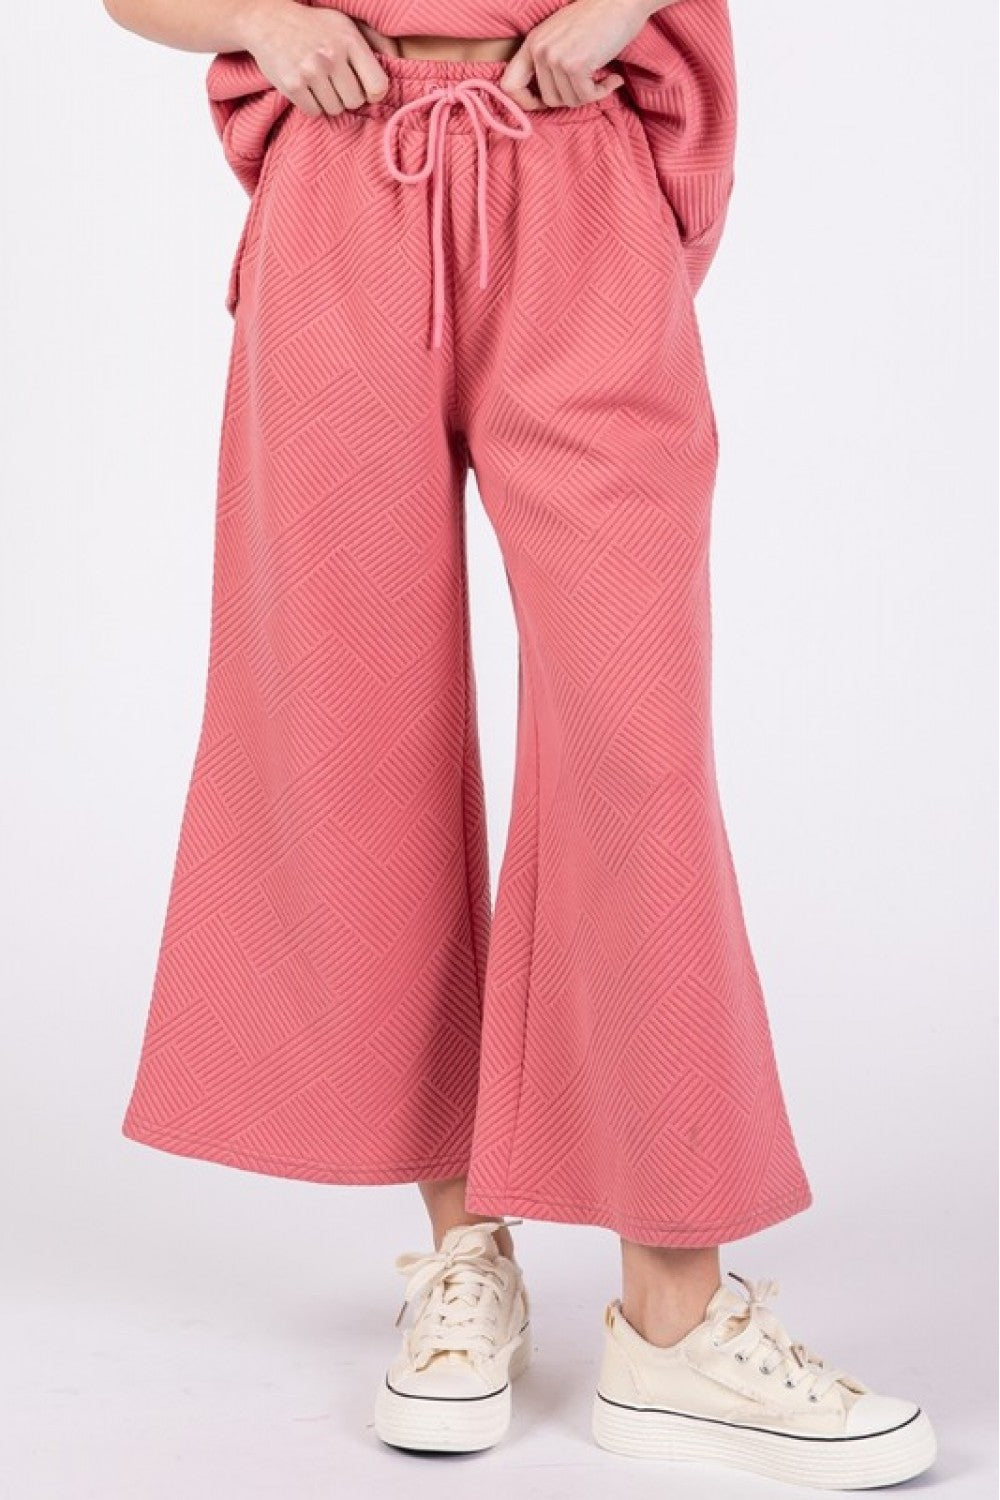 Coral Pink Patterned French Terry Pant Set